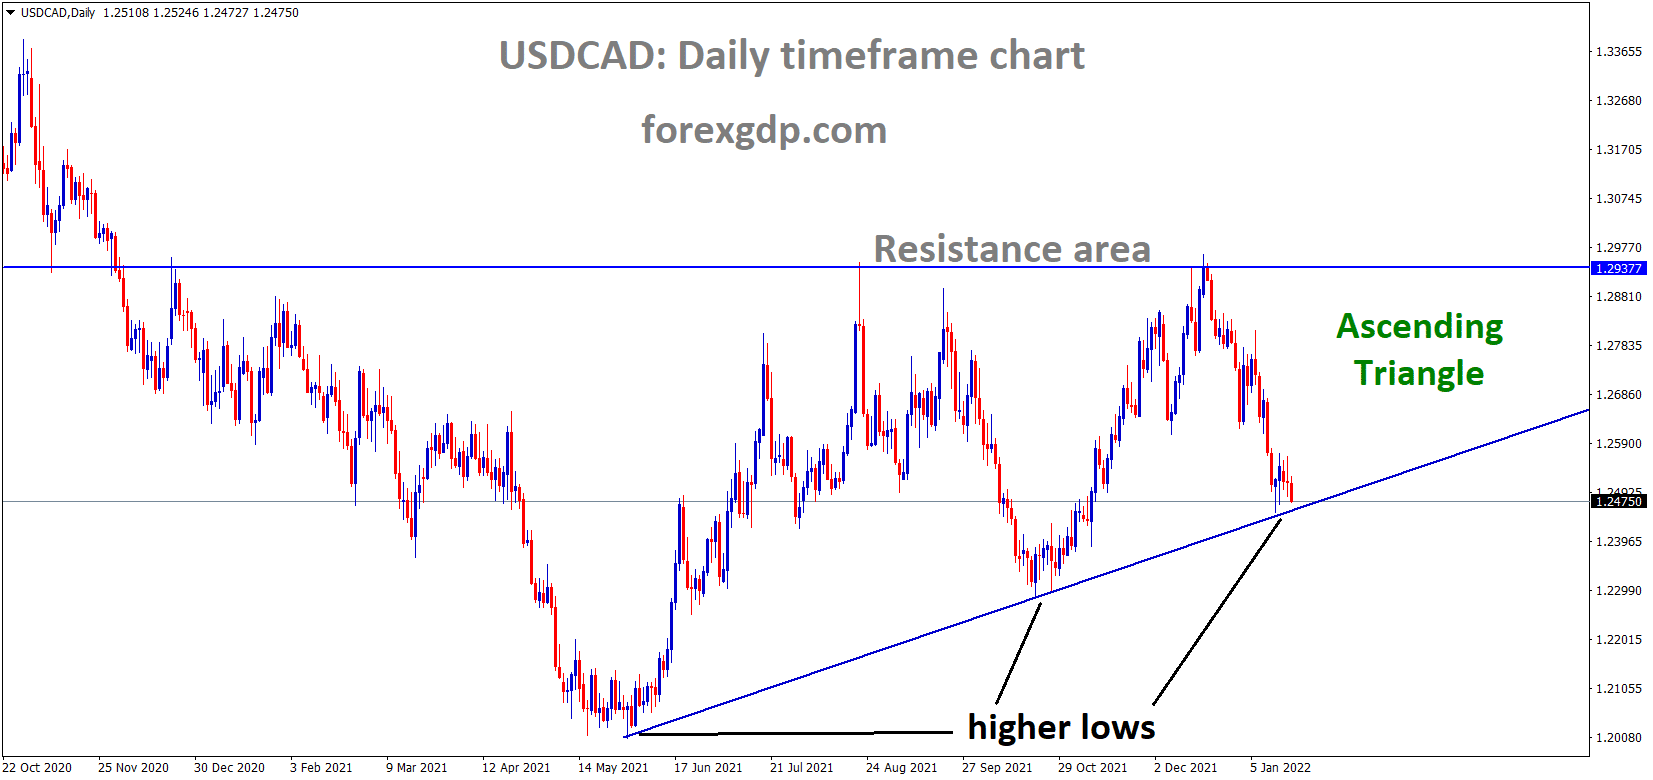 USDCAD is moving in an AScending triangle pattern and the market has reached the higher low area of the triangle pattern